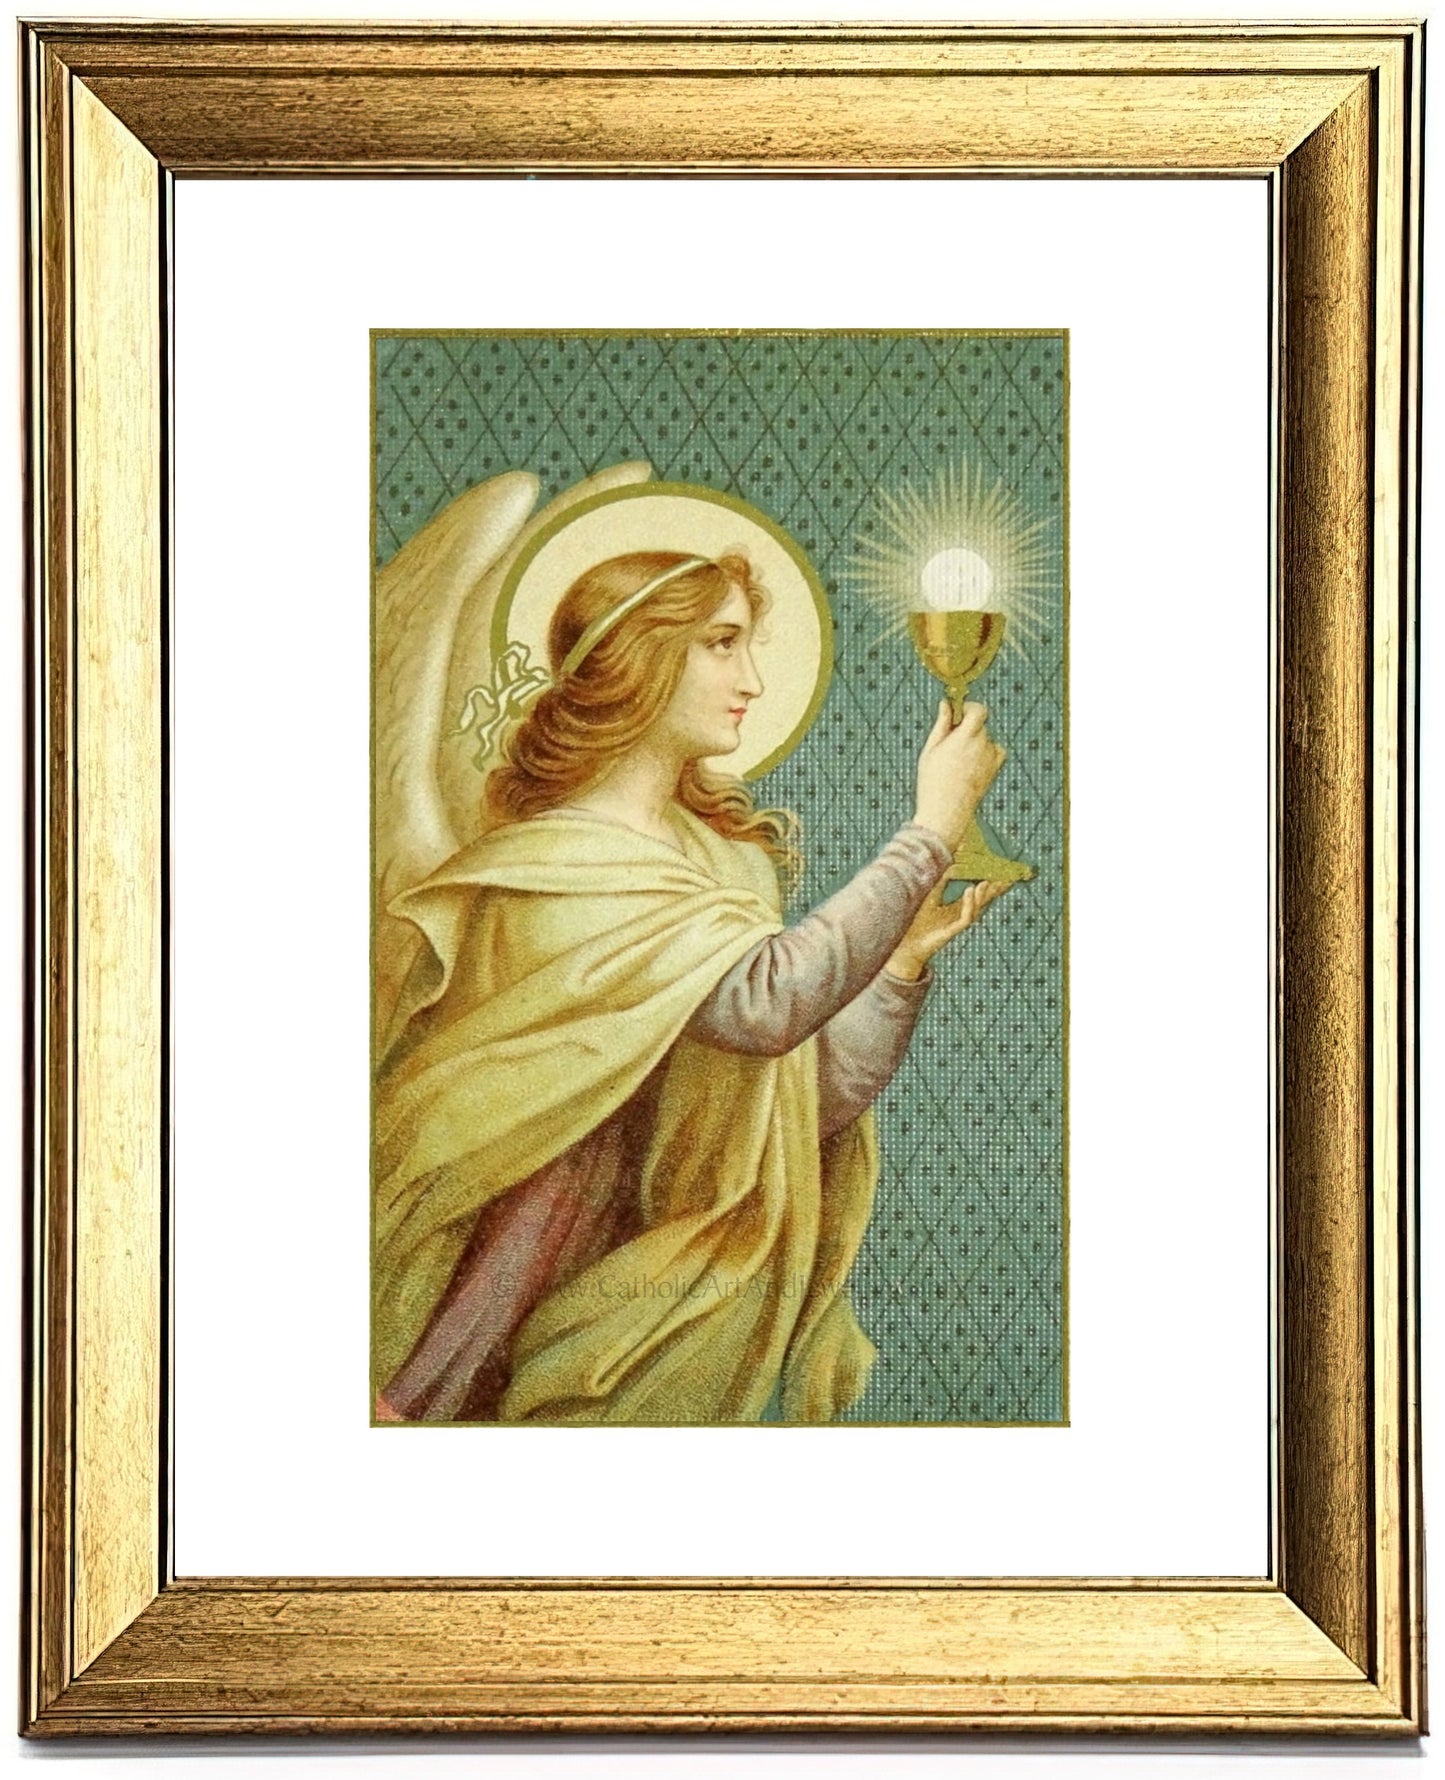 Bread of Angels – based on a Vintage French Holy Card – Catholic Art Print